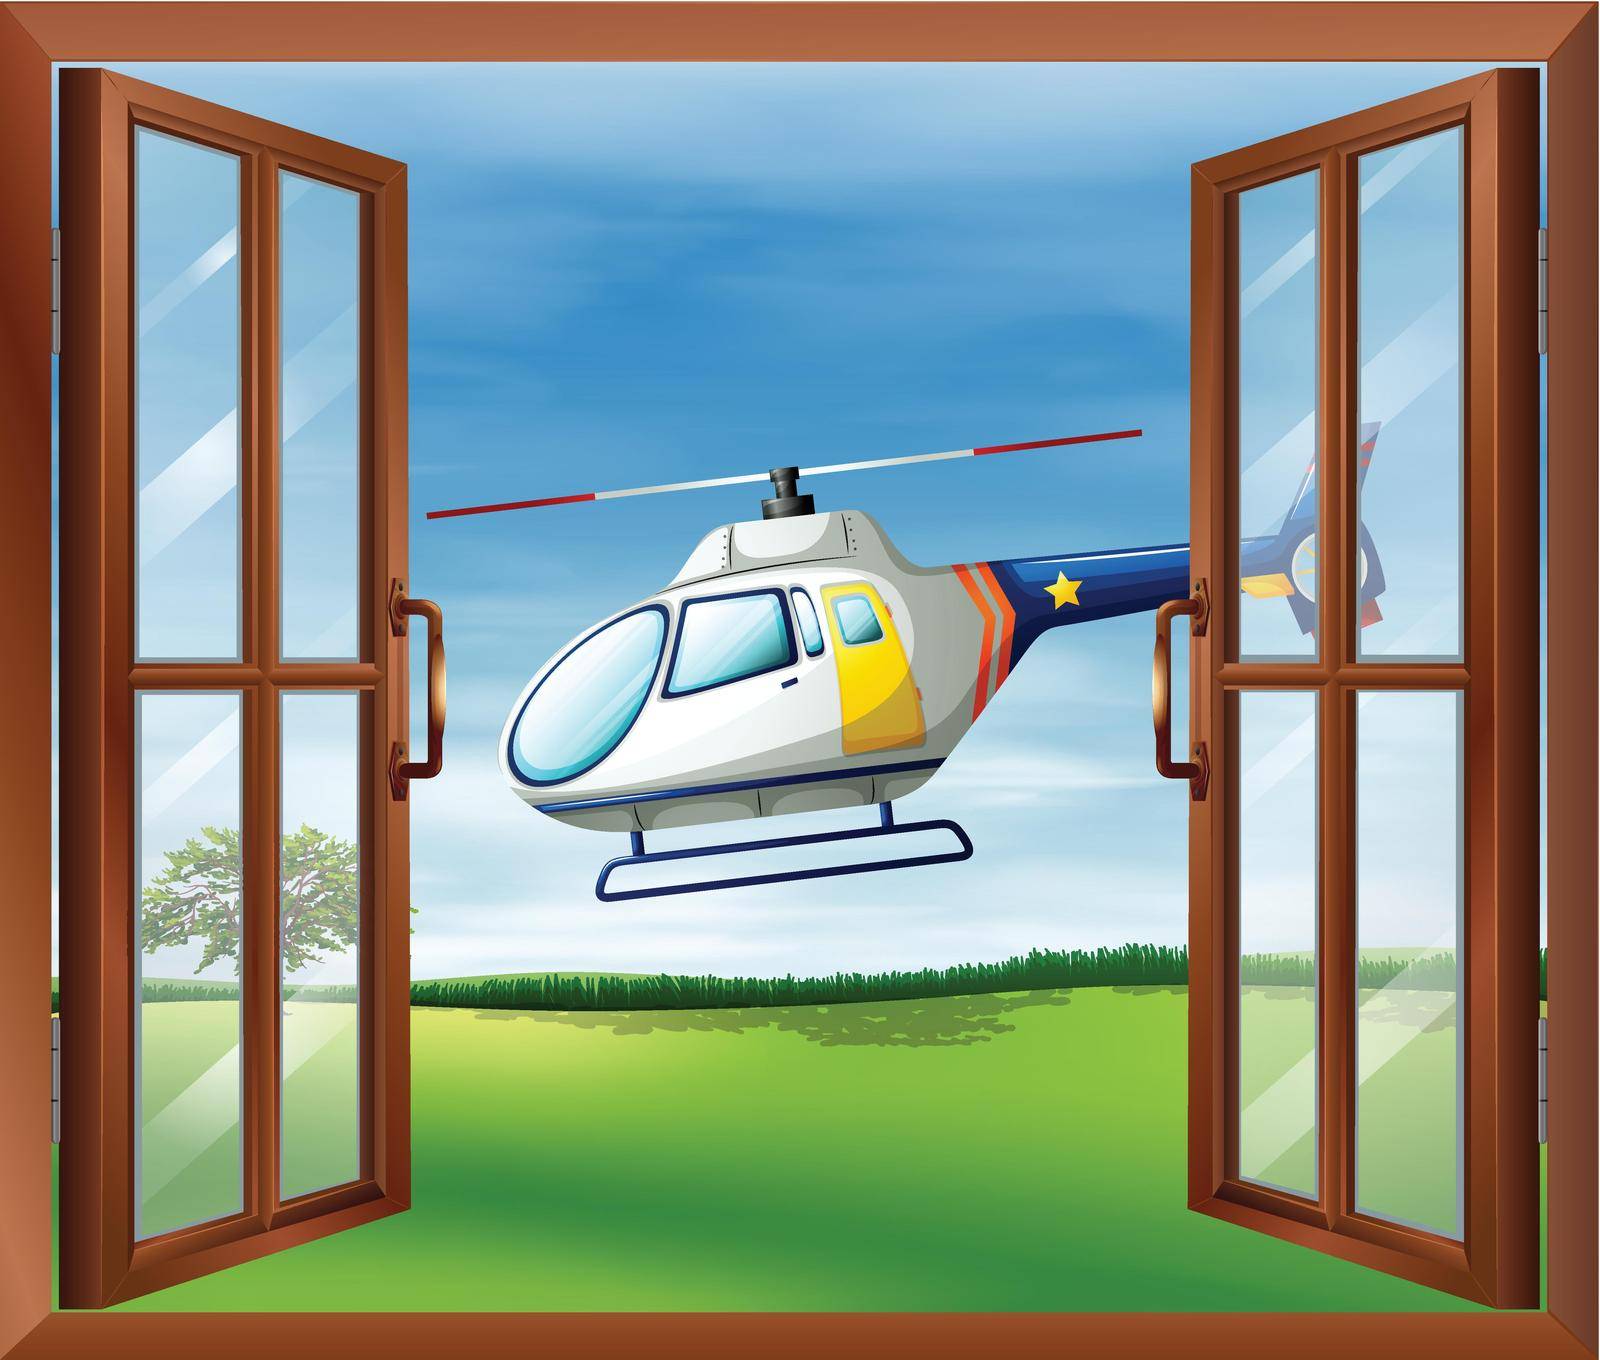 Illustration of a helicopter outside the window